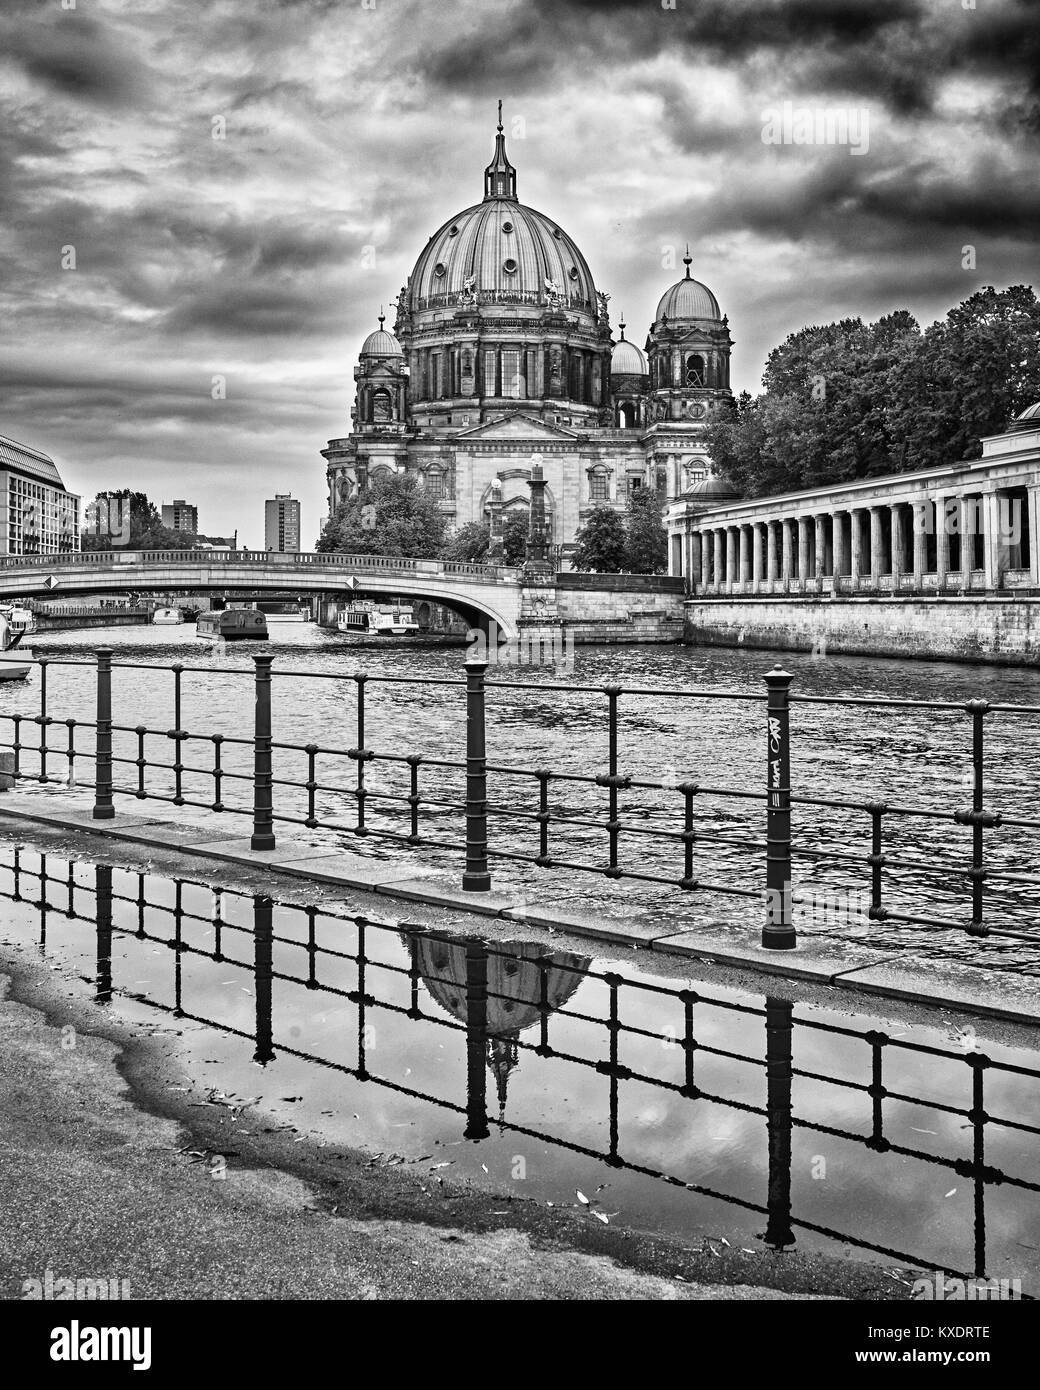 Berlin cathedral, Berliner Dom, suggestive winter atmosphere - black and white photography Stock Photo